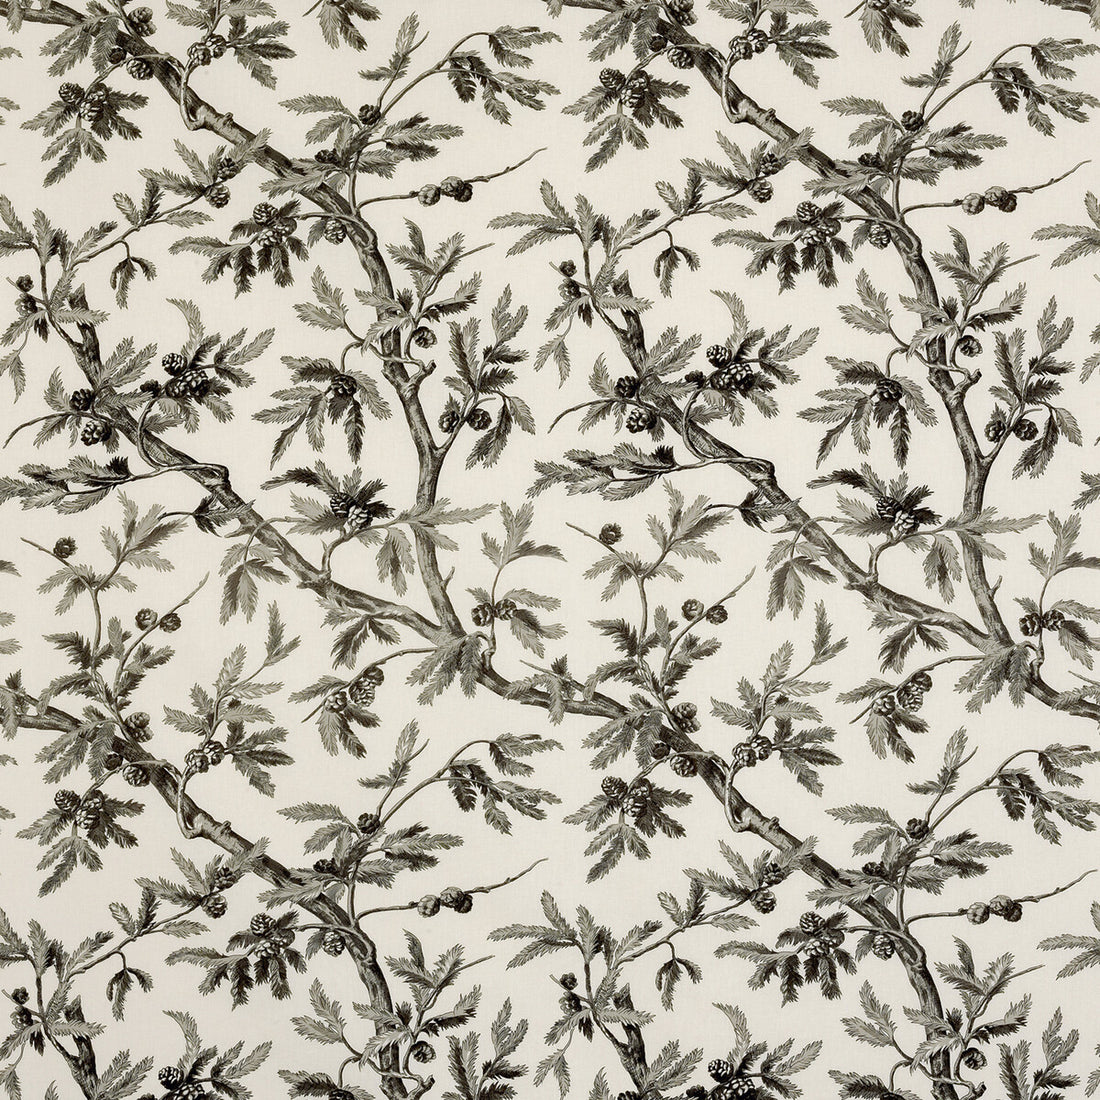 Branches De Pin fabric in beigegrey color - pattern 8015135.116.0 - by Brunschwig &amp; Fils in the Madeleine Castaing collection